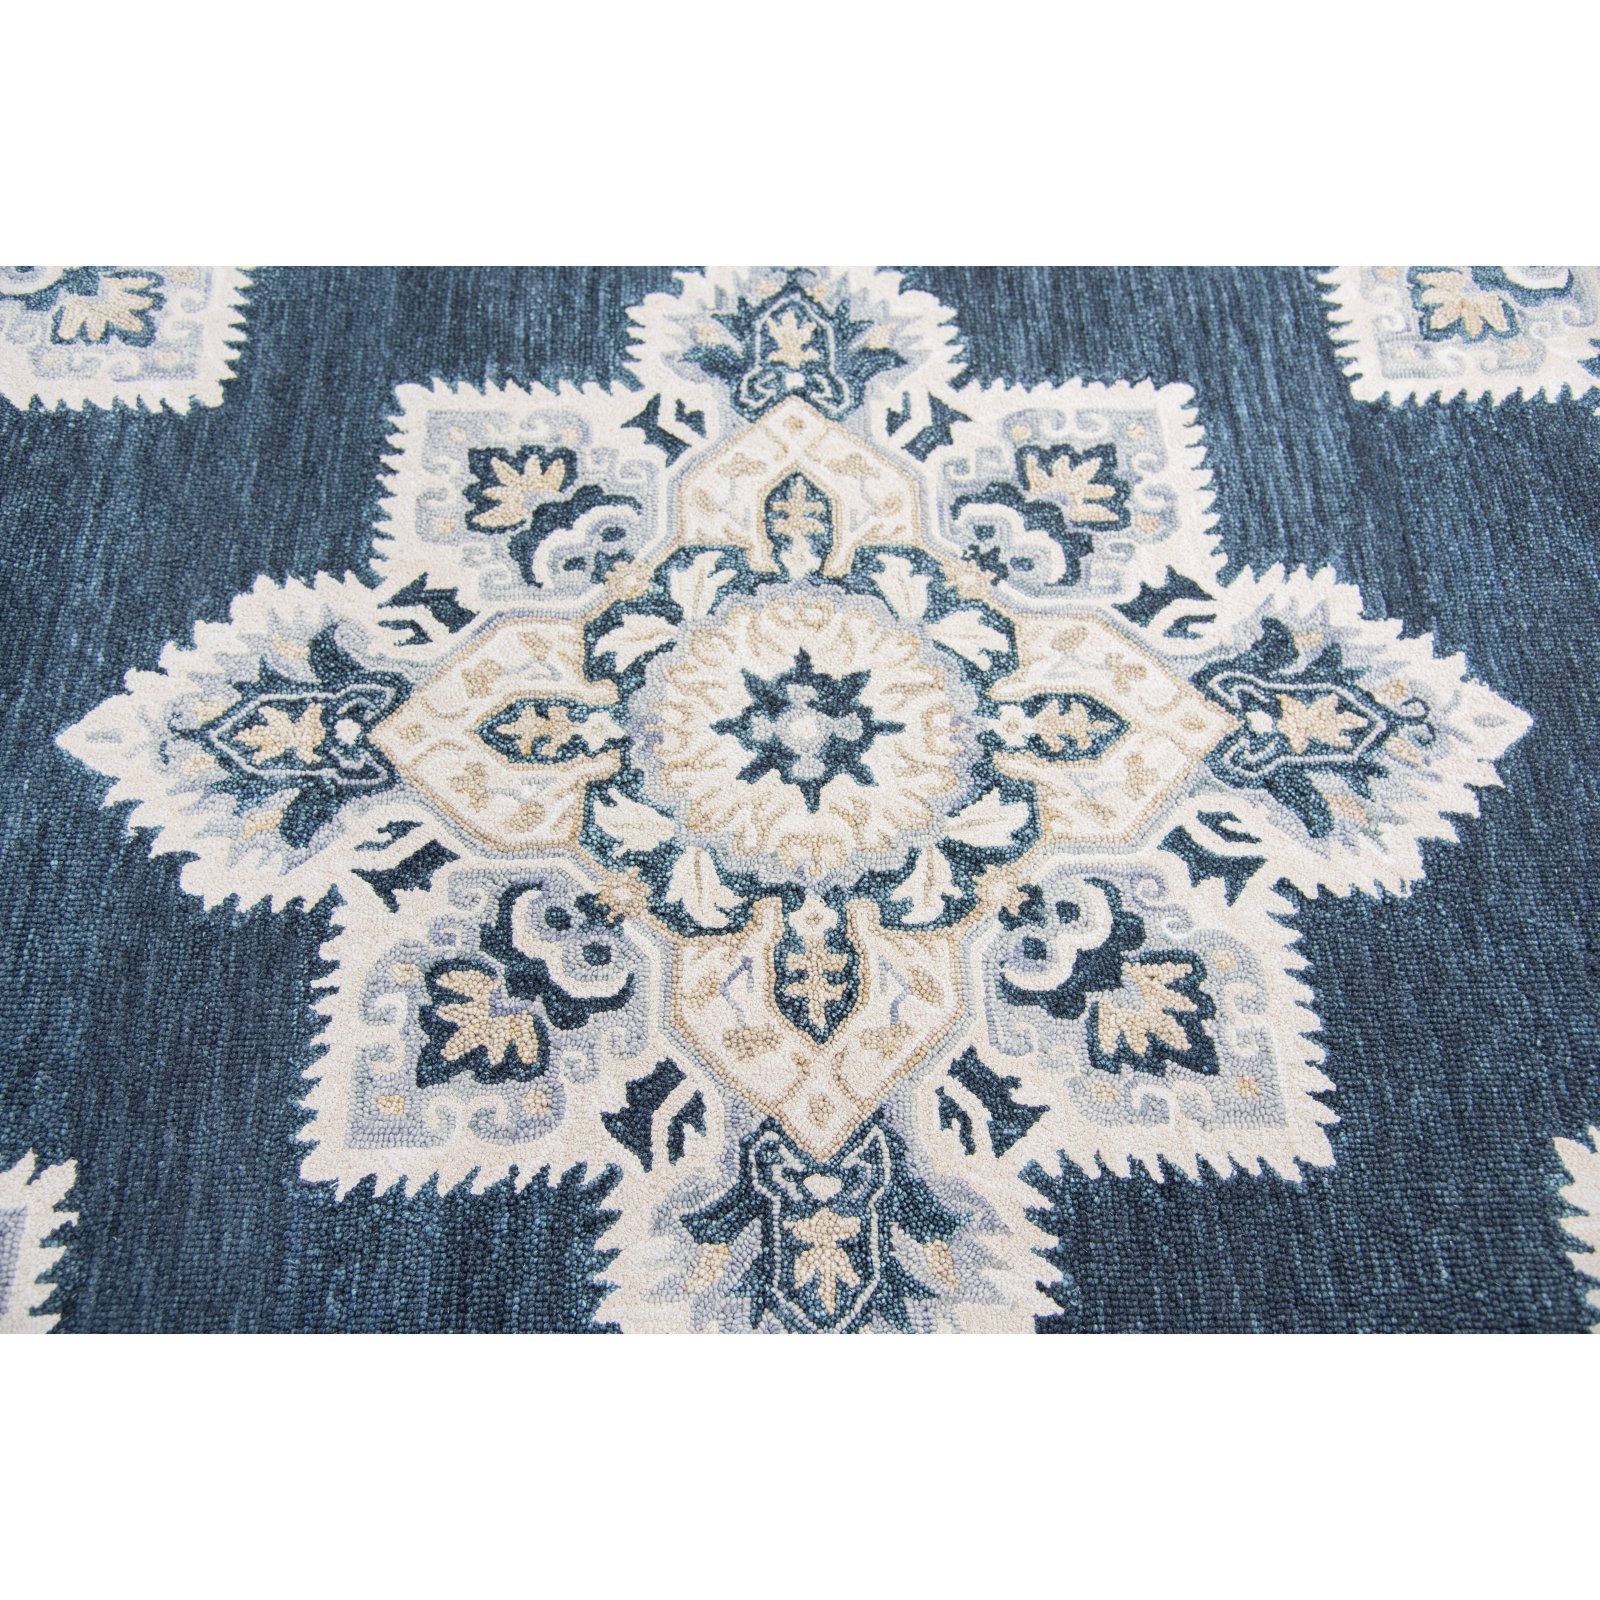 Rizzy Home RS070B Dark Blue 2'6" x 8' Hand-Tufted Area Rug - image 5 of 6